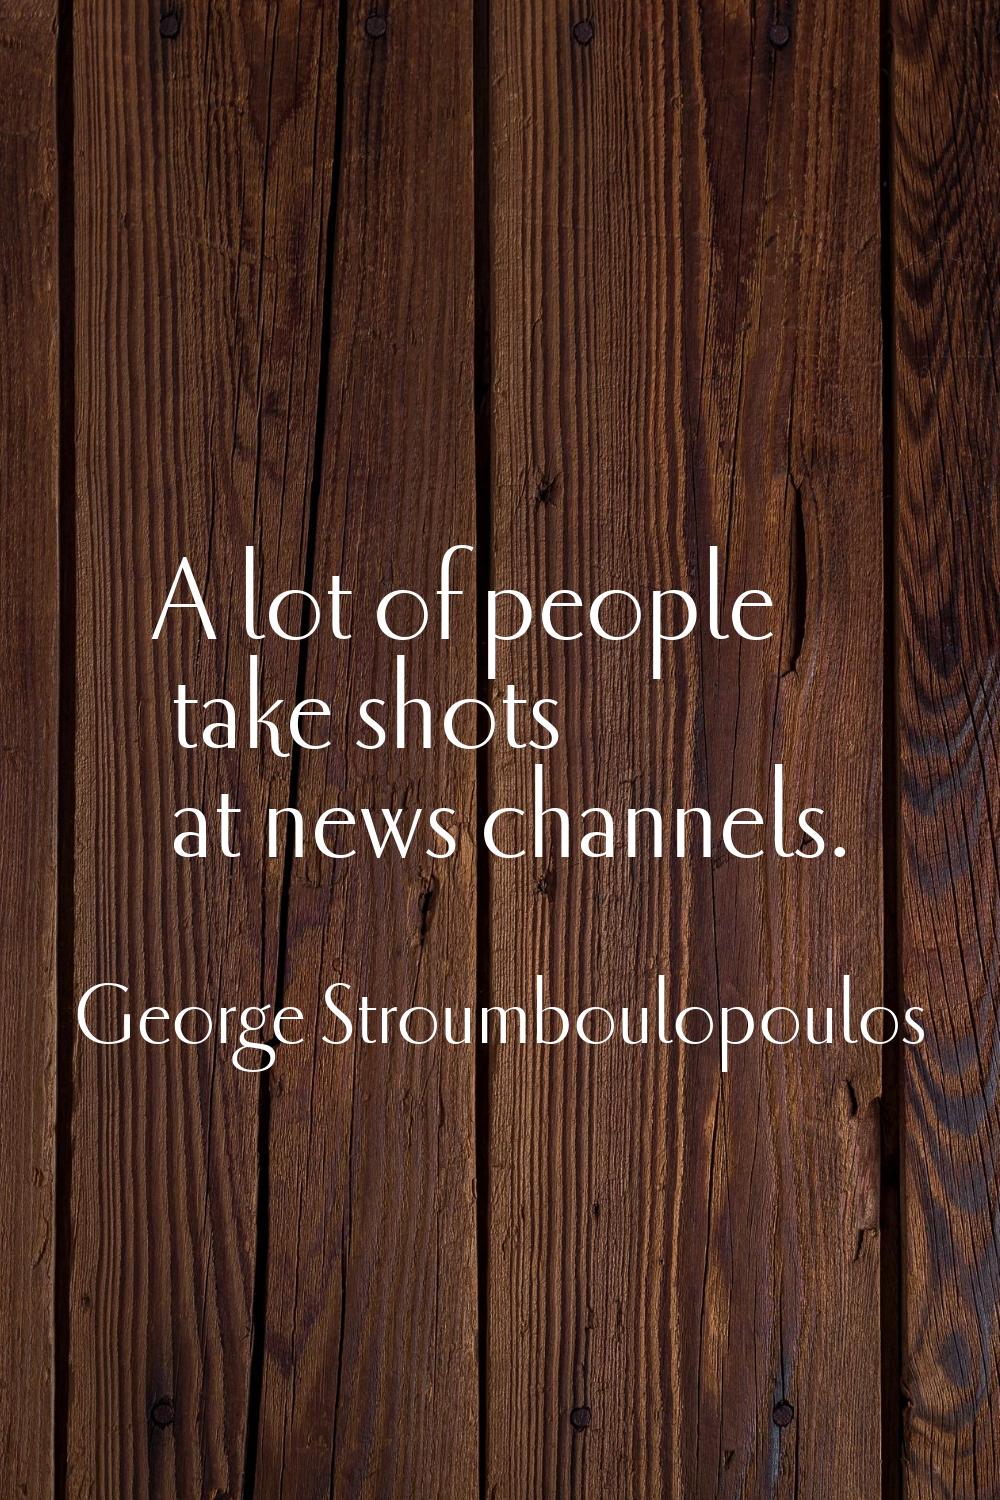 A lot of people take shots at news channels.